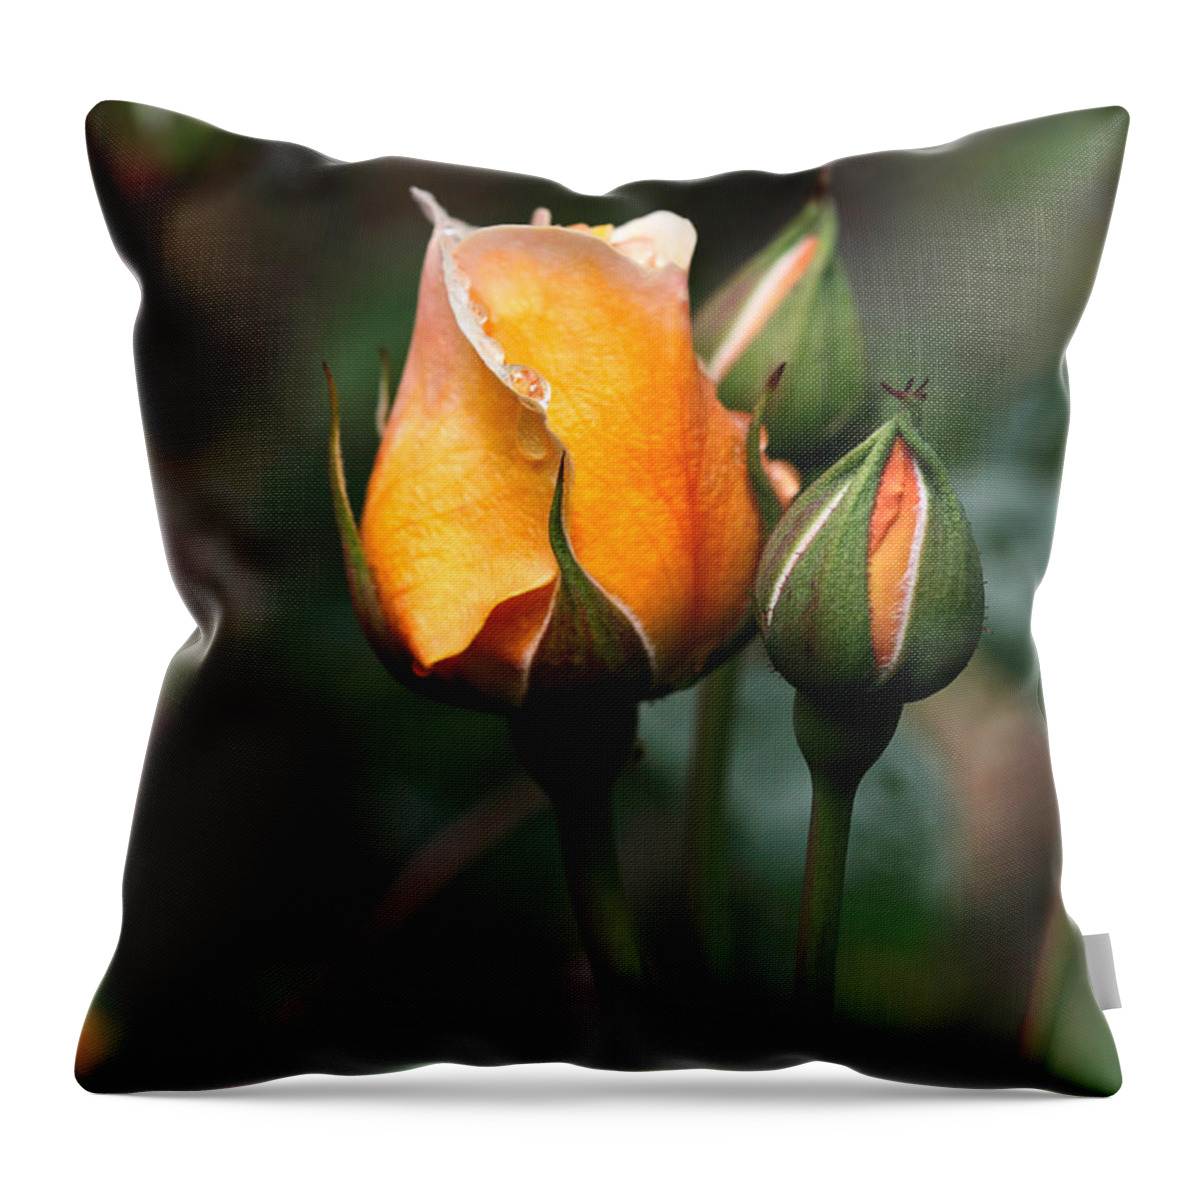 Rose Throw Pillow featuring the photograph Port Sunlight by Louise Heusinkveld